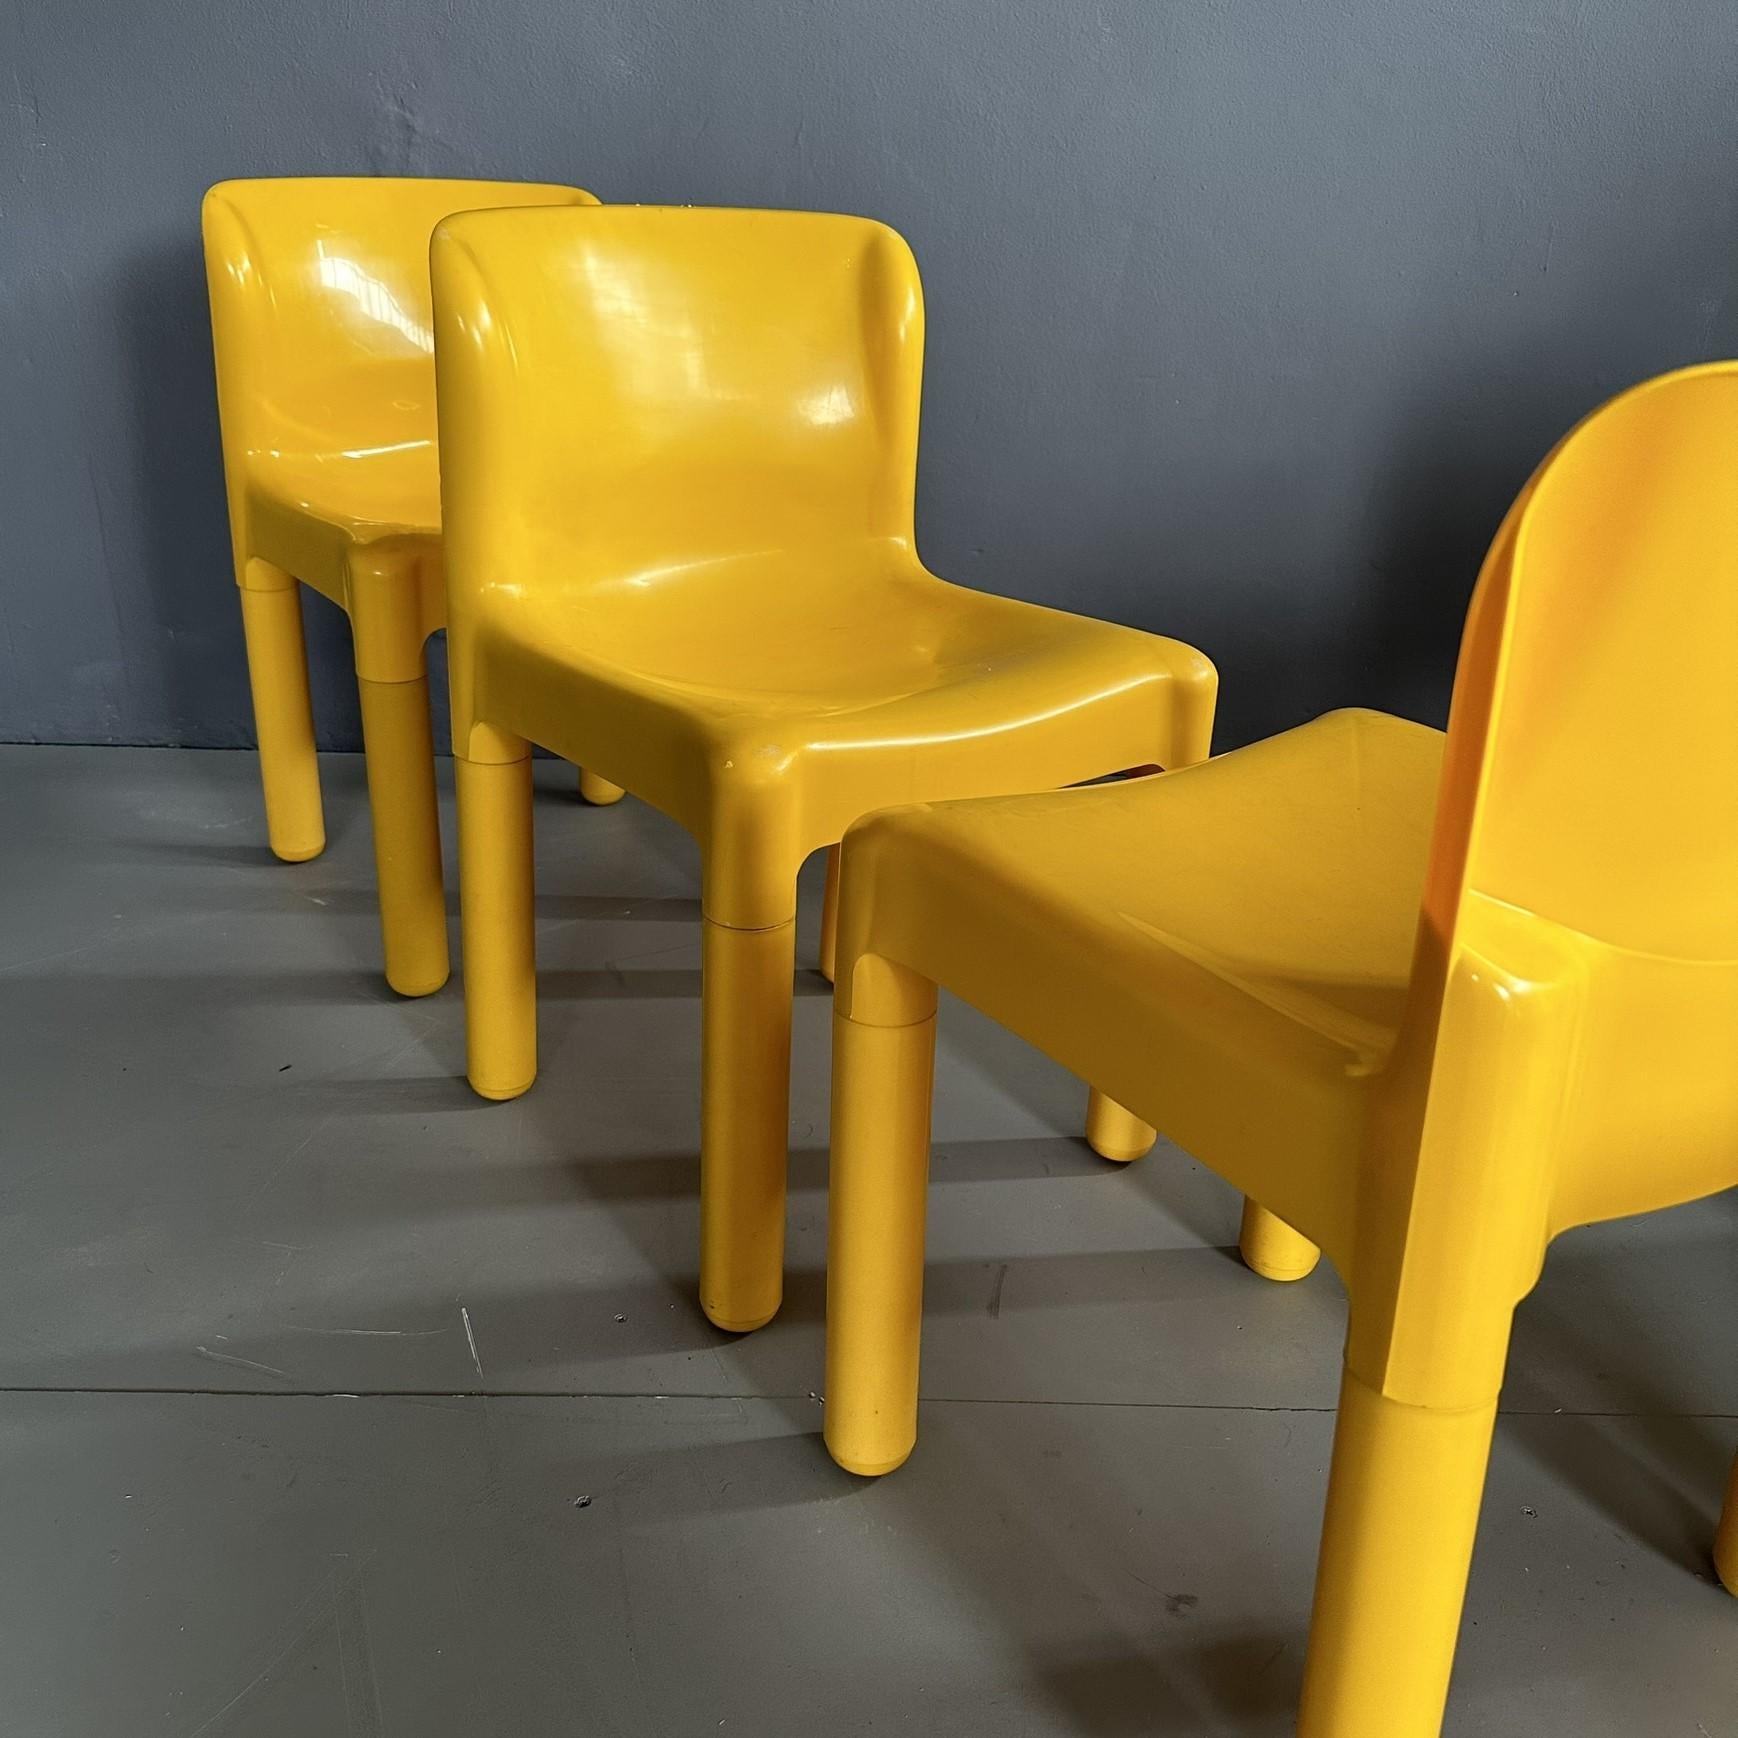 Italian Set of 5 yellow bright chairs mod. 4875 designed by Carlo Bartoli for Kartell 